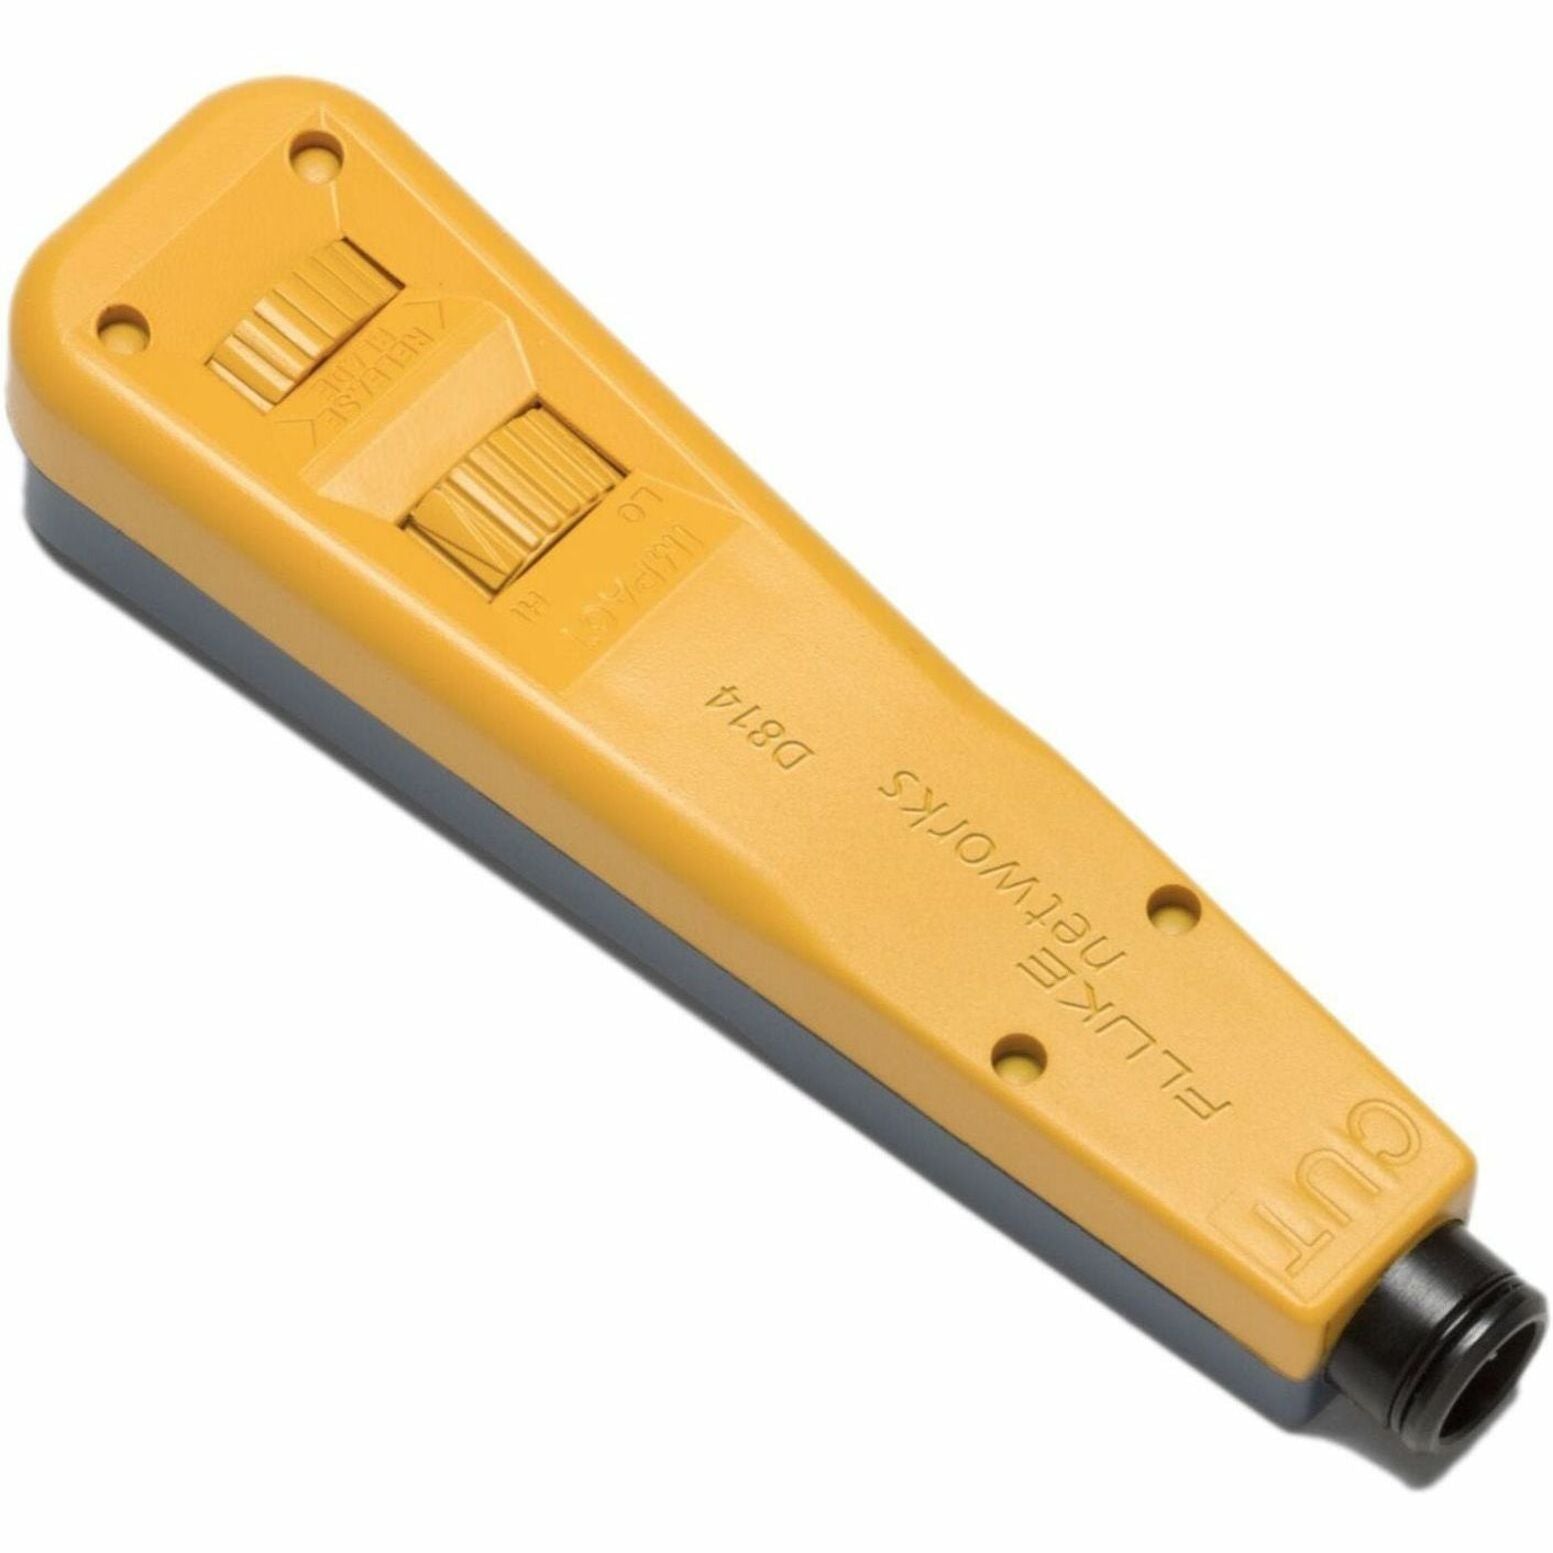 Fluke Networks 10055200 D814 Impact Tool, Lightweight and Easy to Use